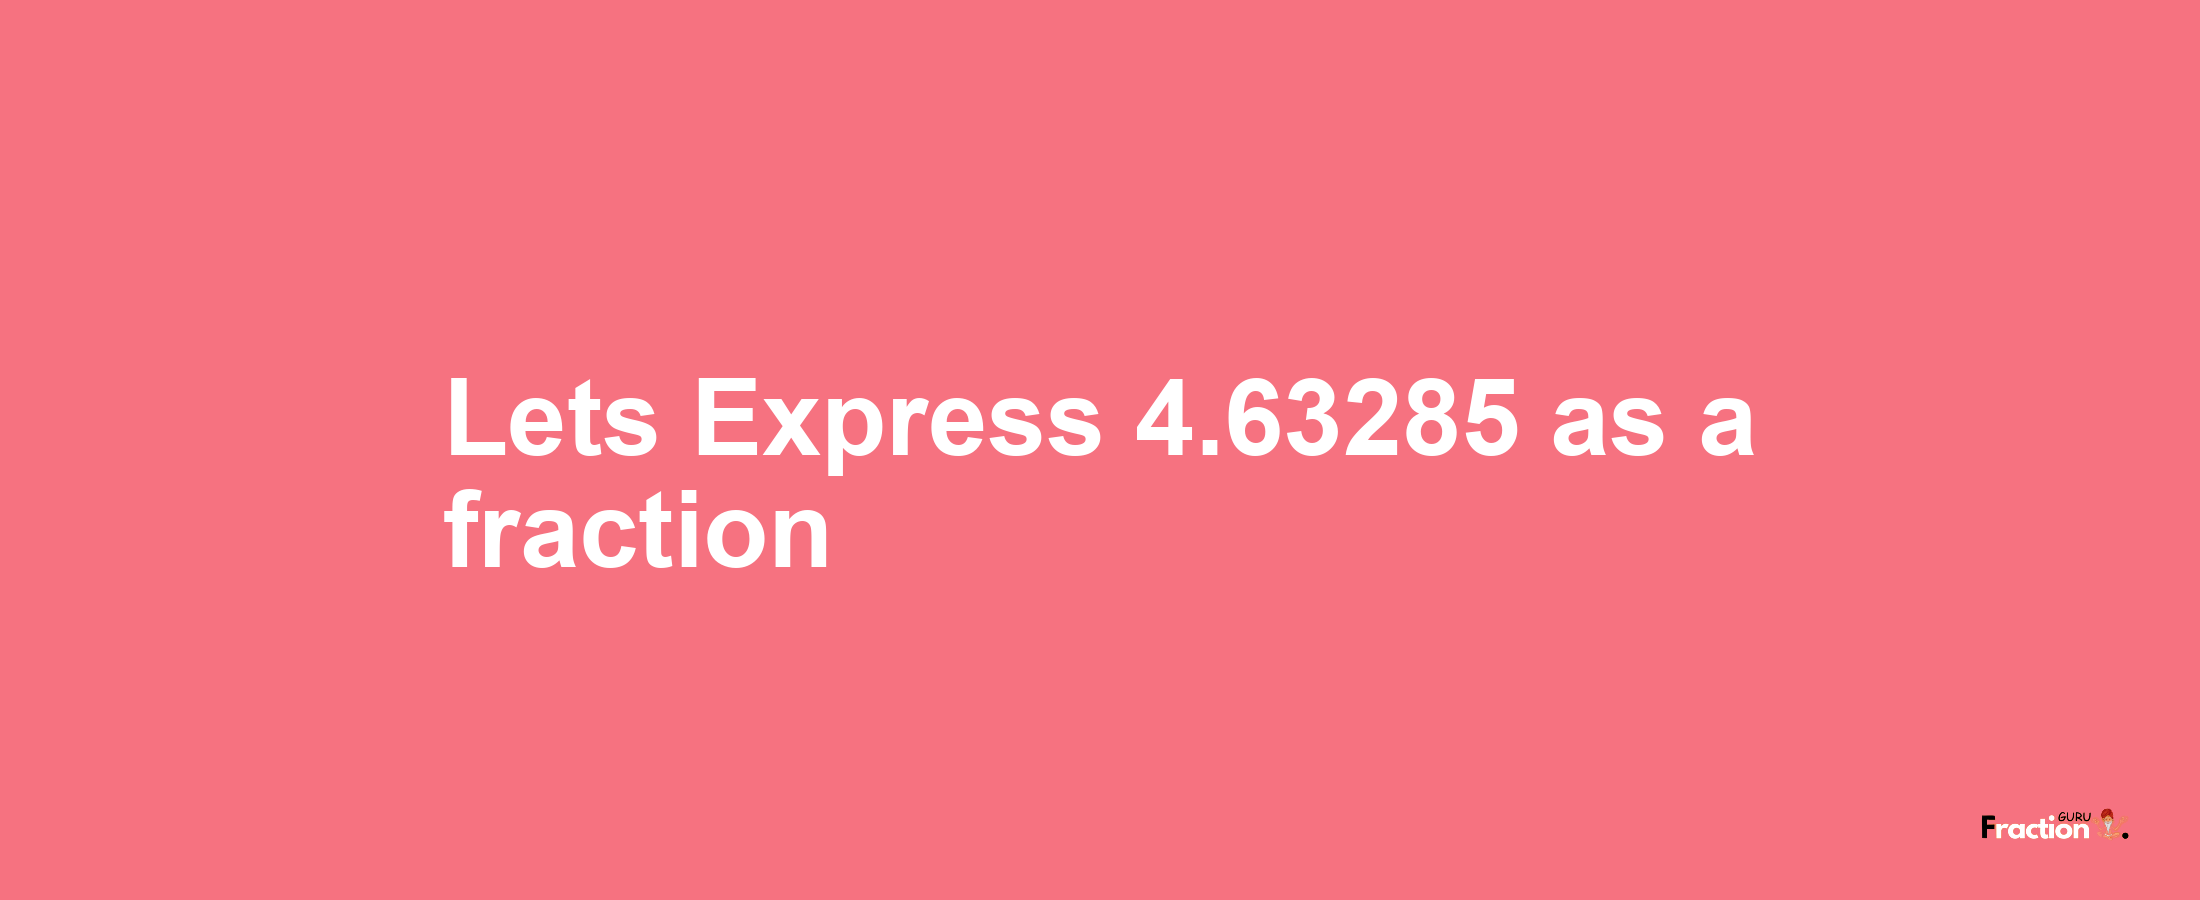 Lets Express 4.63285 as afraction